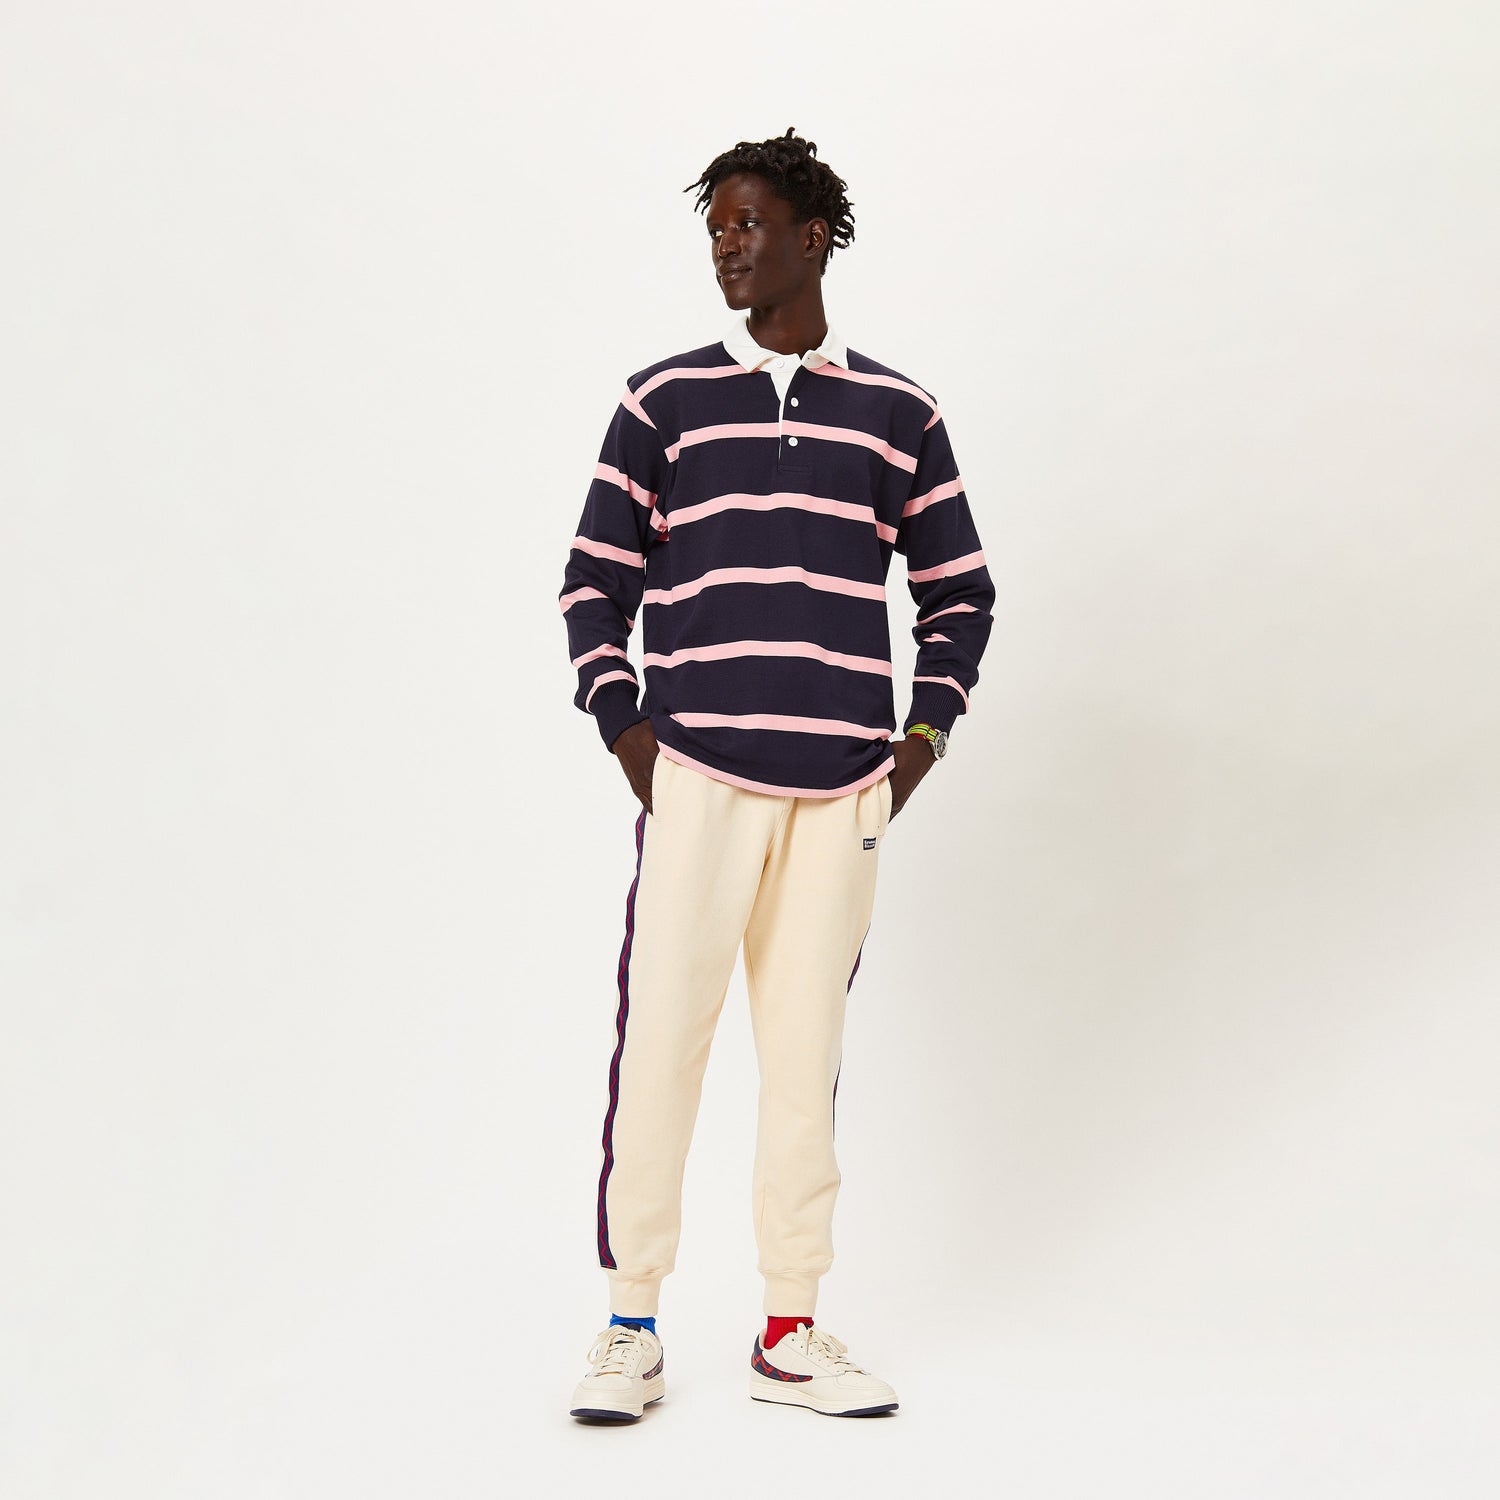 Male model wearing the Hockney Stripe Rugby in navy and pink.